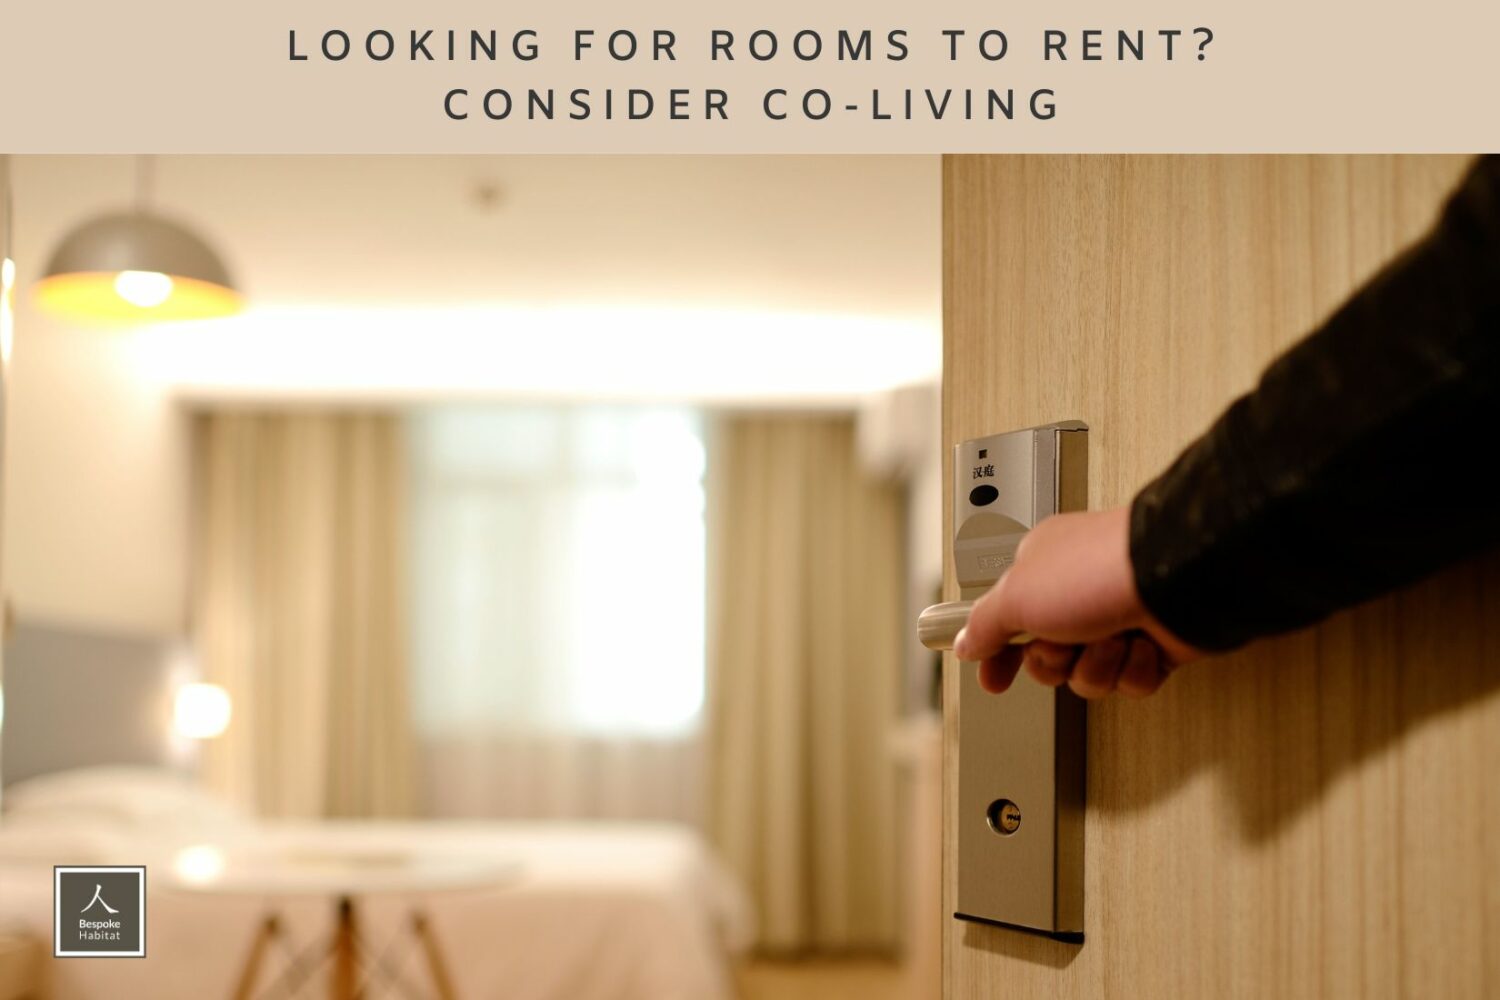 Looking for Rooms to Rent in Singapore Consider Co-living